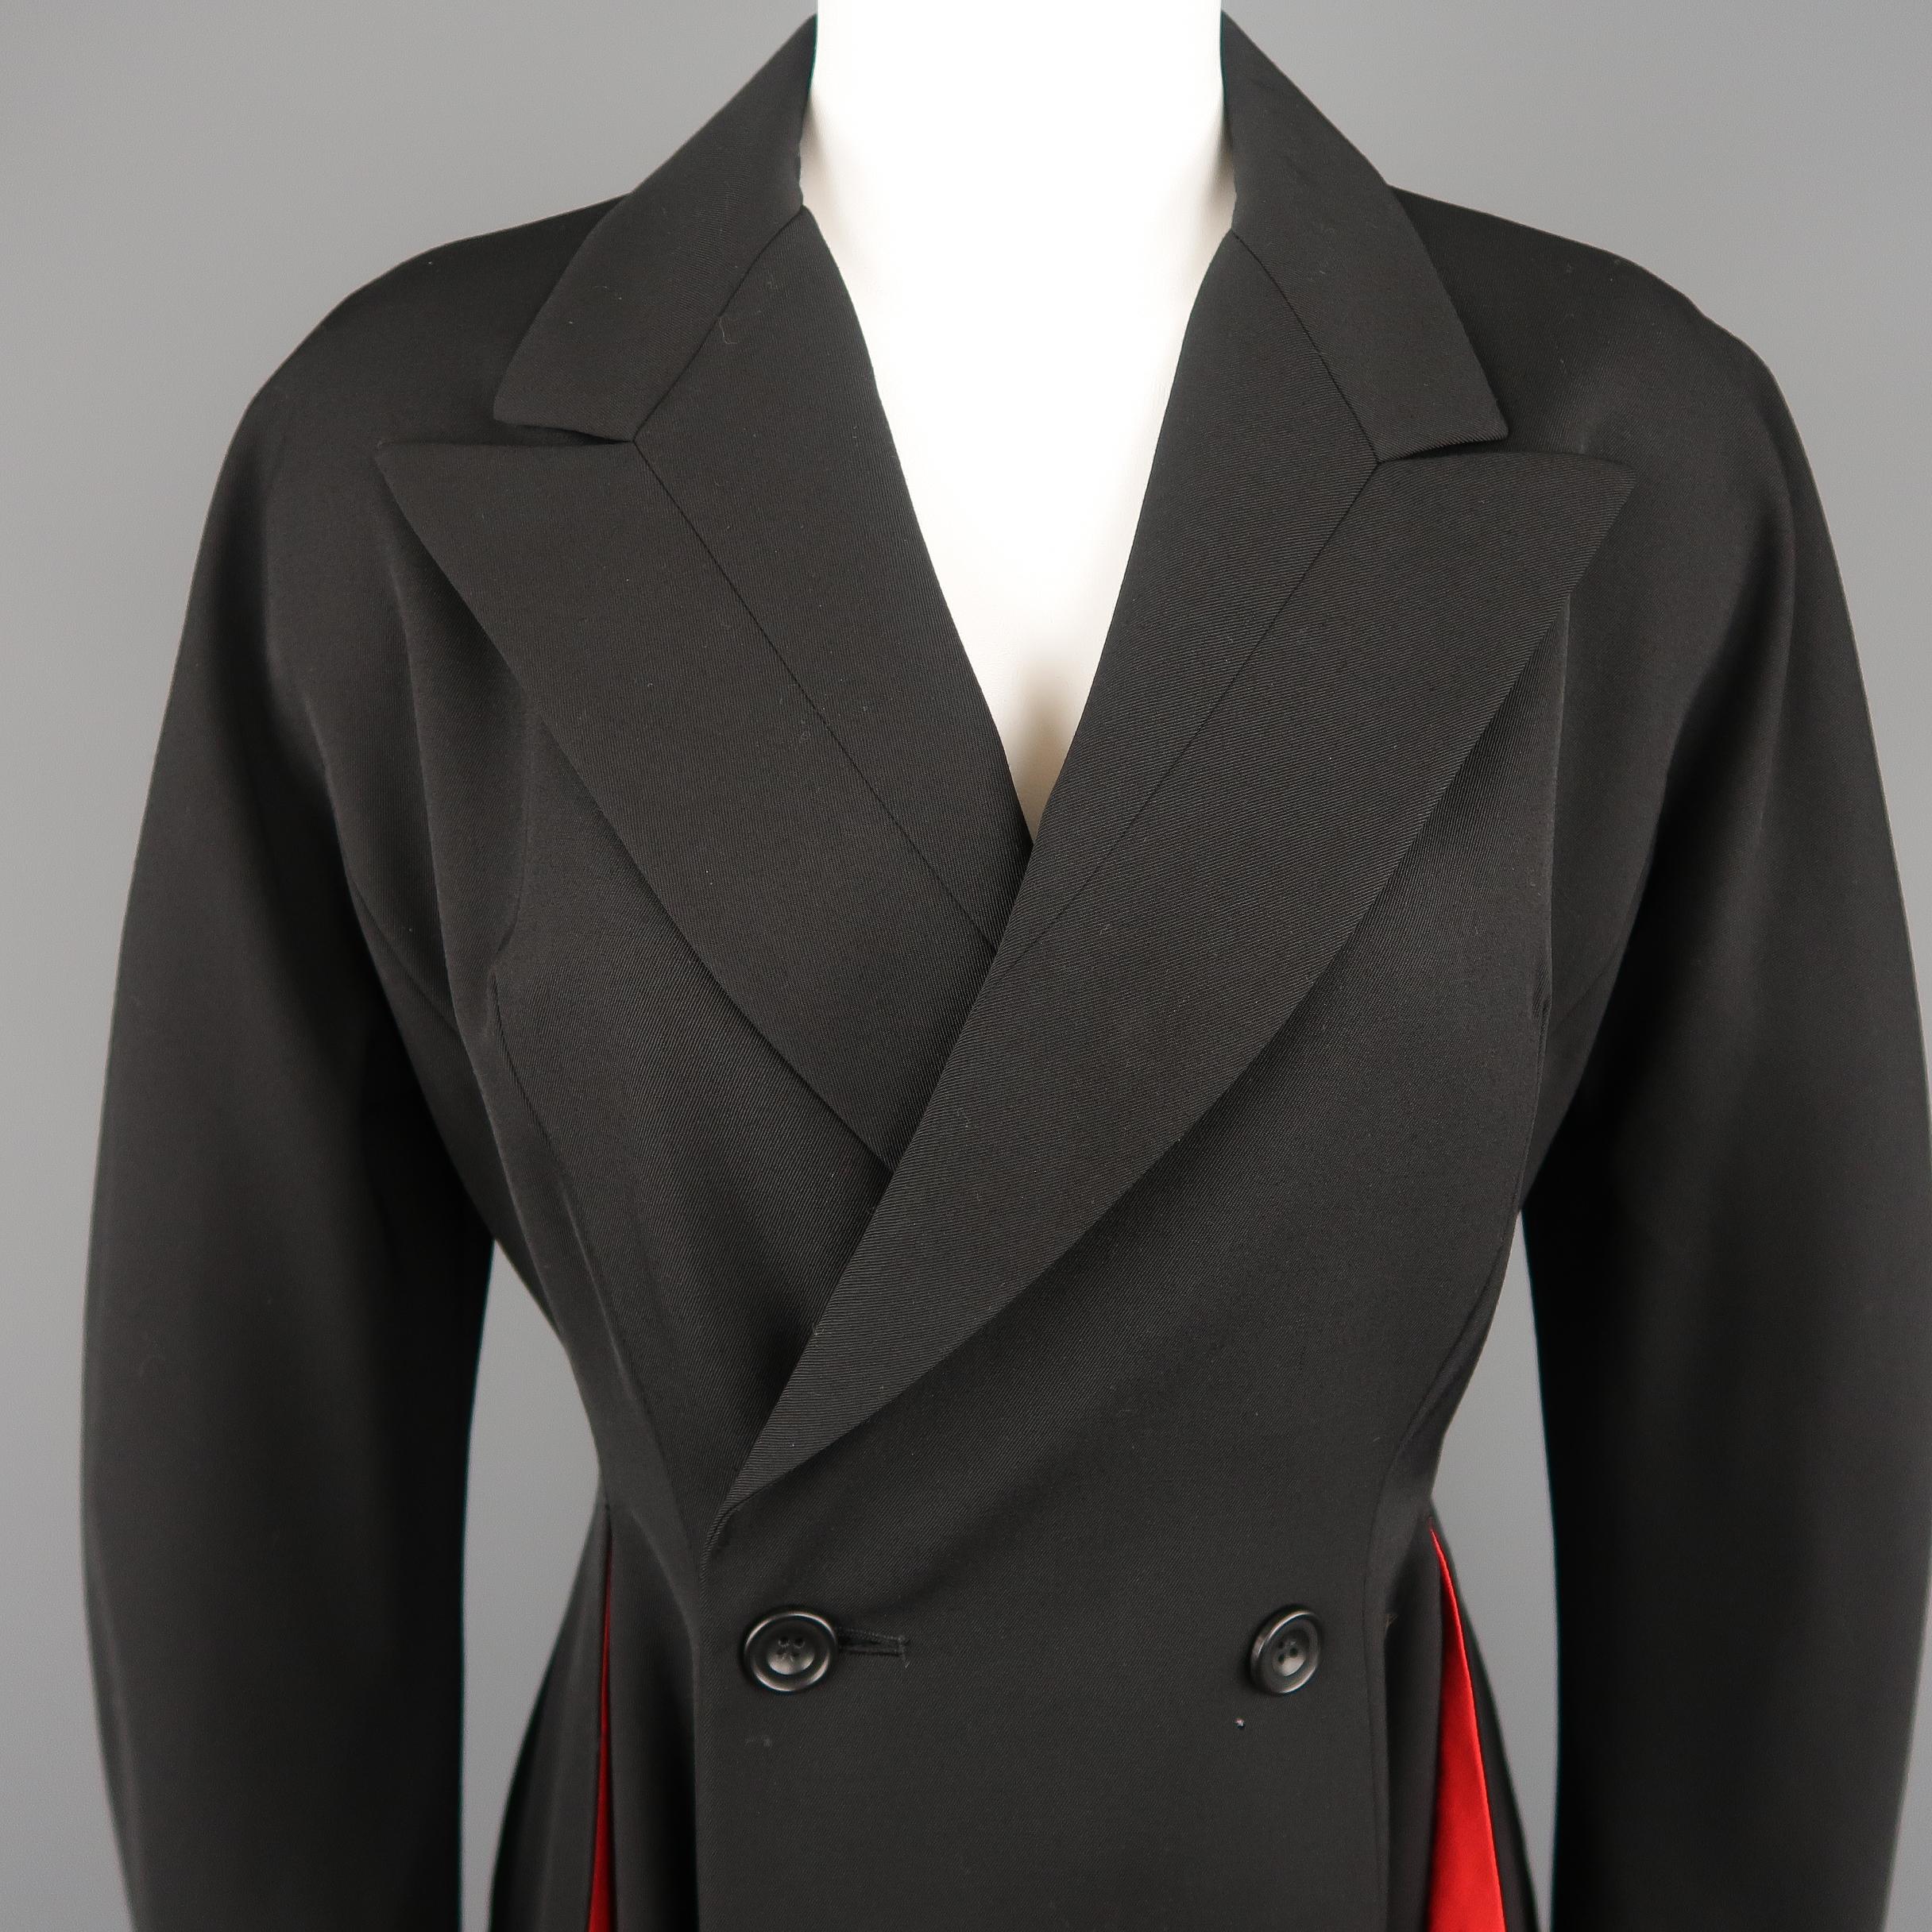 Vintage YOHJI YAMAMOTO blazer comes in black wool twill with a peak lapel, double breasted front, and double slit, red lined ruffle hem. Made in Japan.
 
Excellent Vintage Pre-Owned Condition.
Marked: S
 
Measurements:
 
Shoulder: 17 in.
Bust: 36